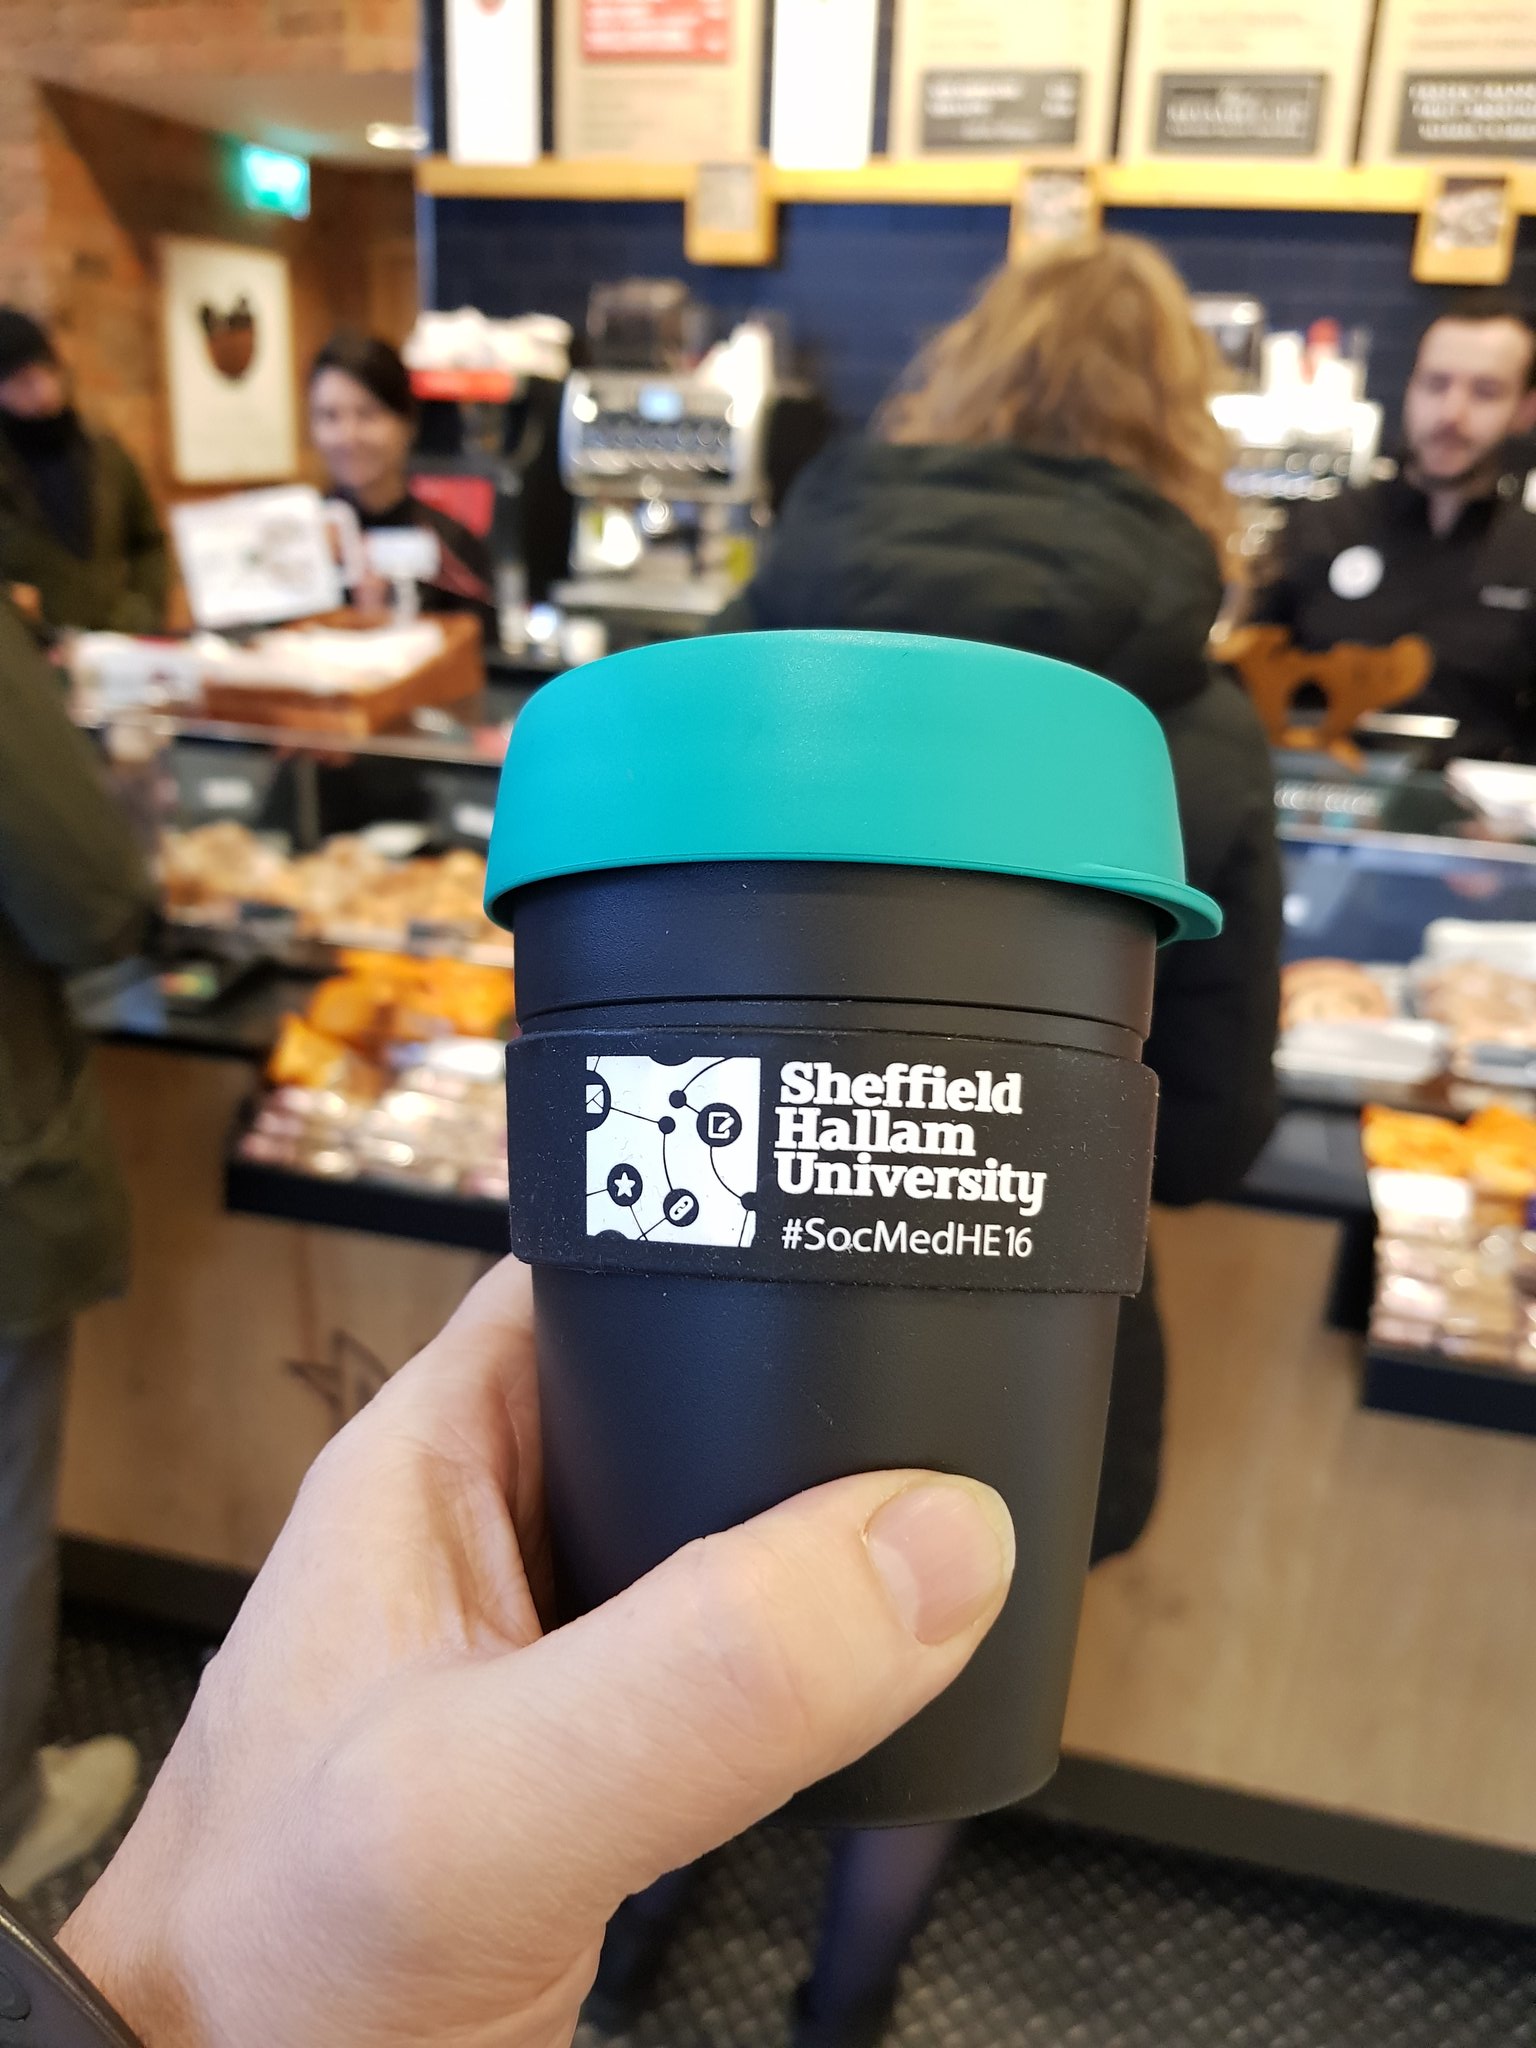 Still using my cup from last year #socmedhe17 do we get a new one this year? https://t.co/wPt0EHTNw1